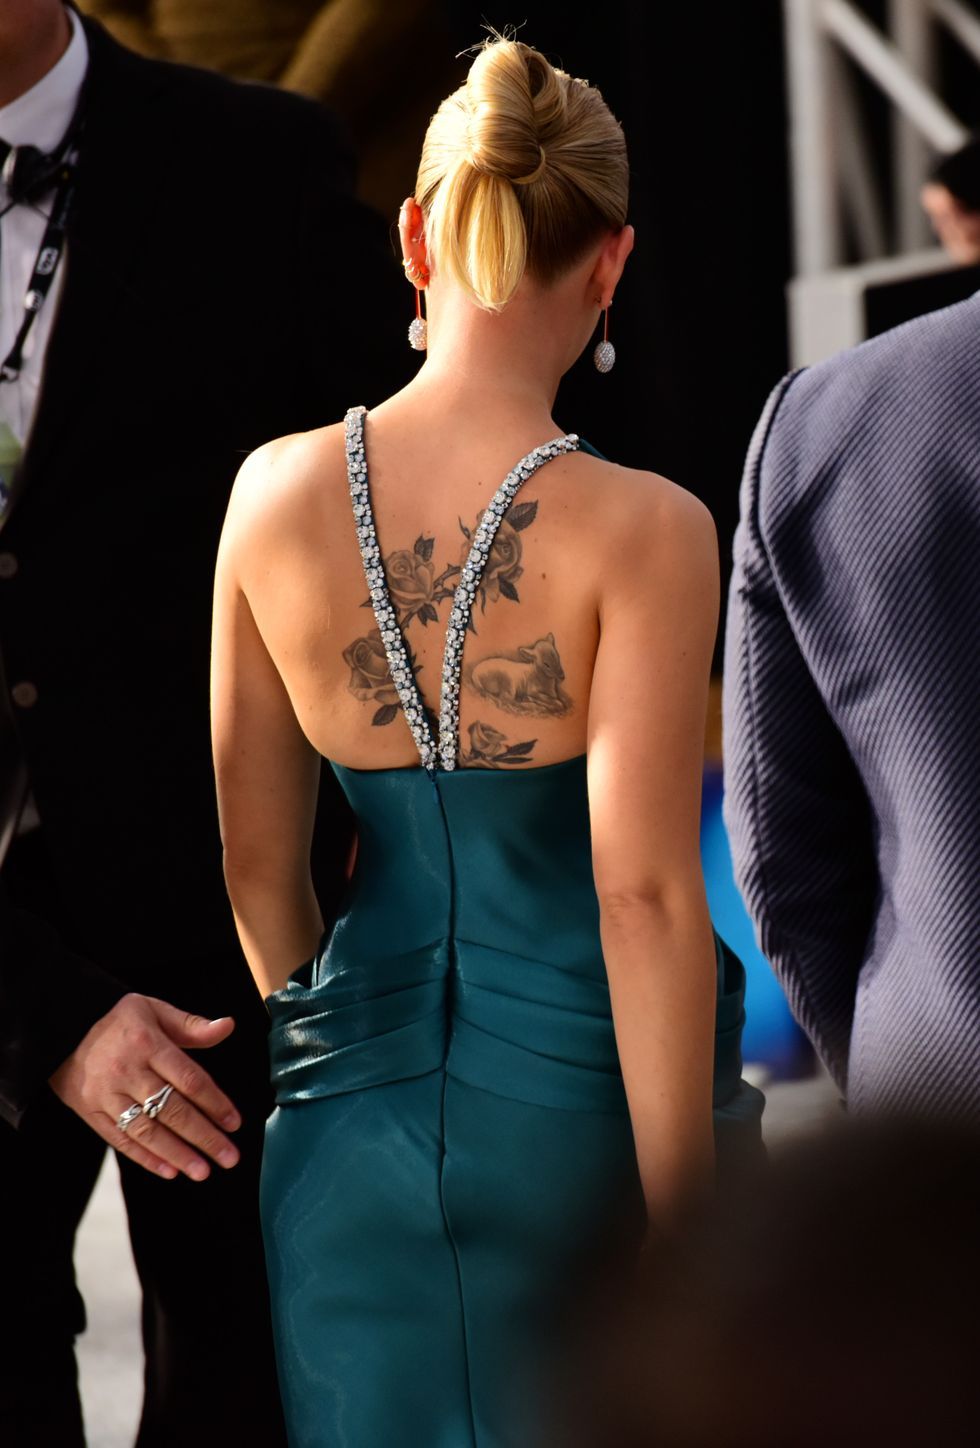 The Worst Tattoos in Hollywood